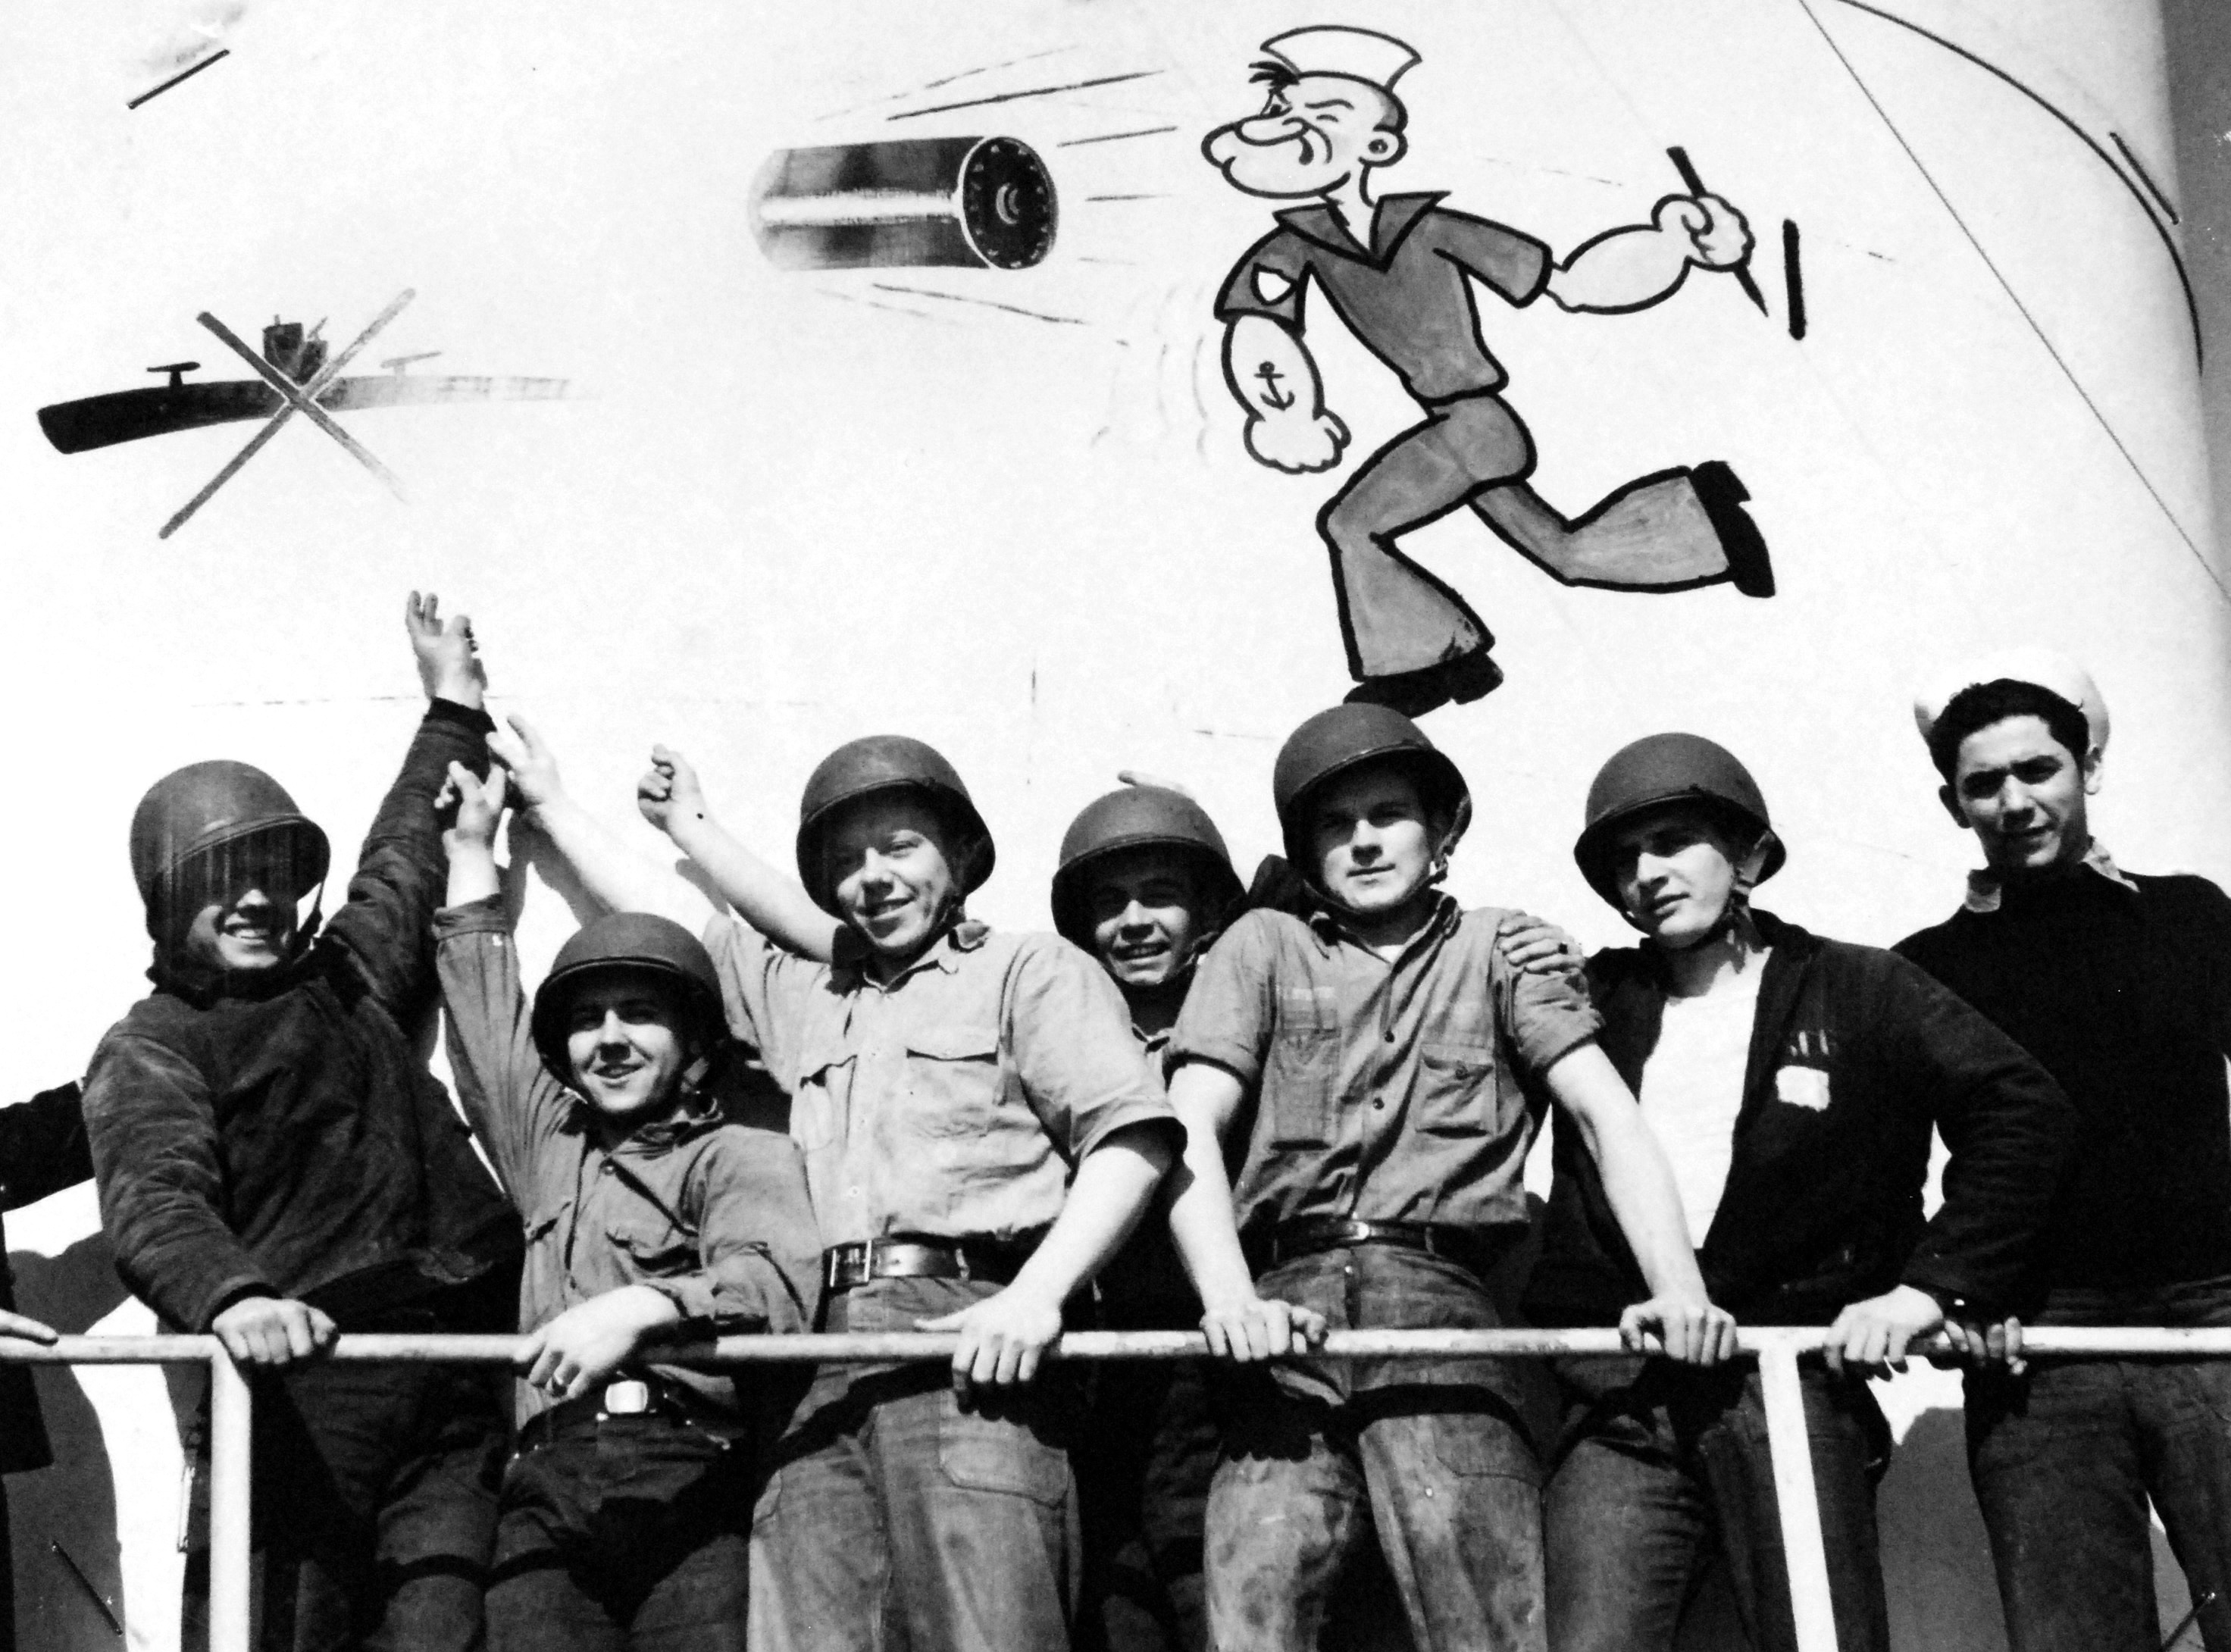 Crewmen of the United States Coast Guard cutter Spencer celebrating the new artwork on the ship’s funnel commemorating Spencer’s sinking of U-175 by depth charge in the North Atlantic.